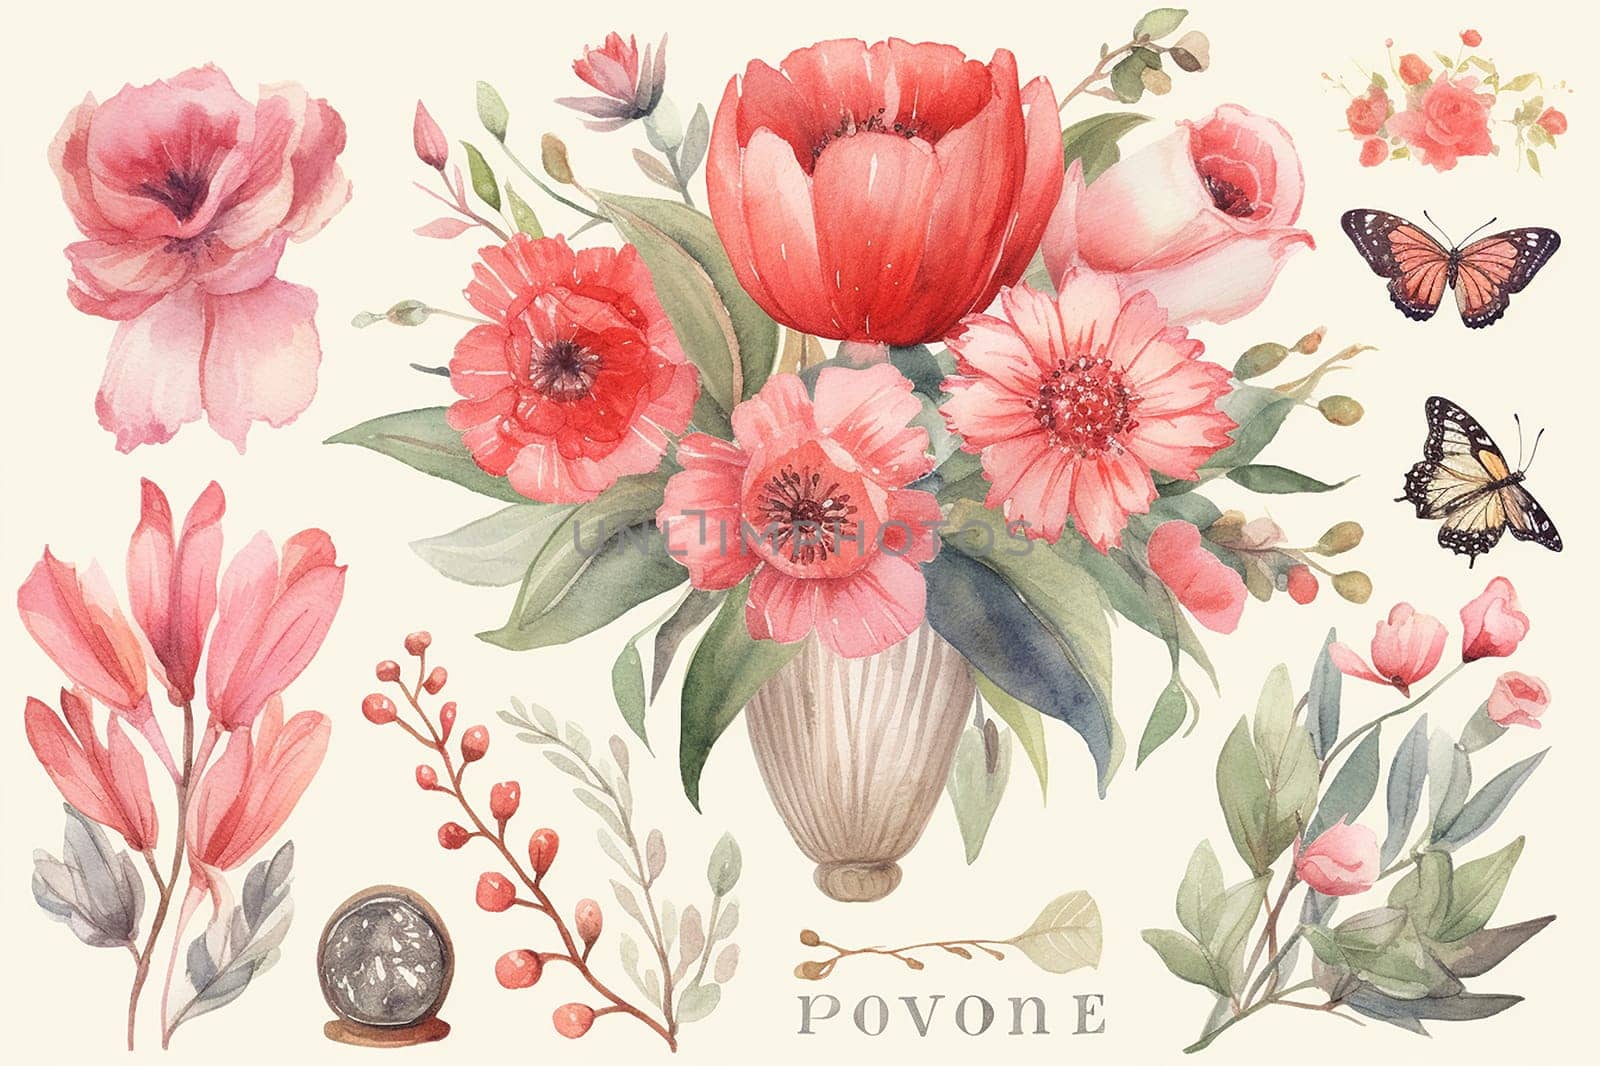 Vintage illustration of various flowers and butterflies with soft pastel colors.